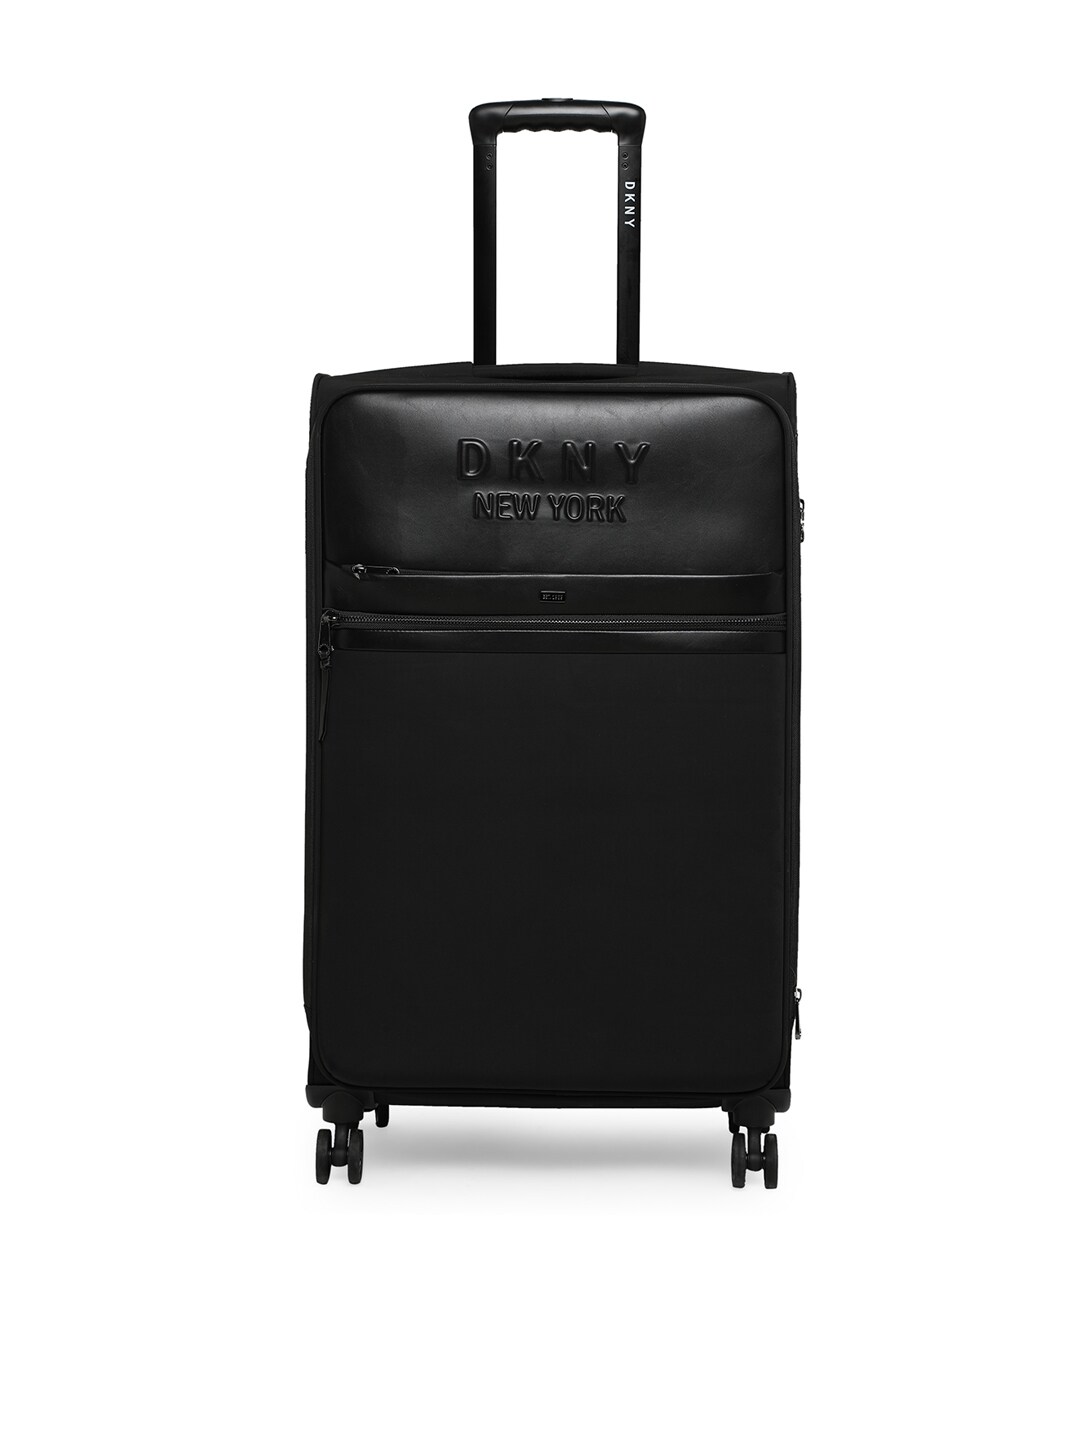 DKNY TRADEMARK Range Black Color Soft Large Luggage Price in India